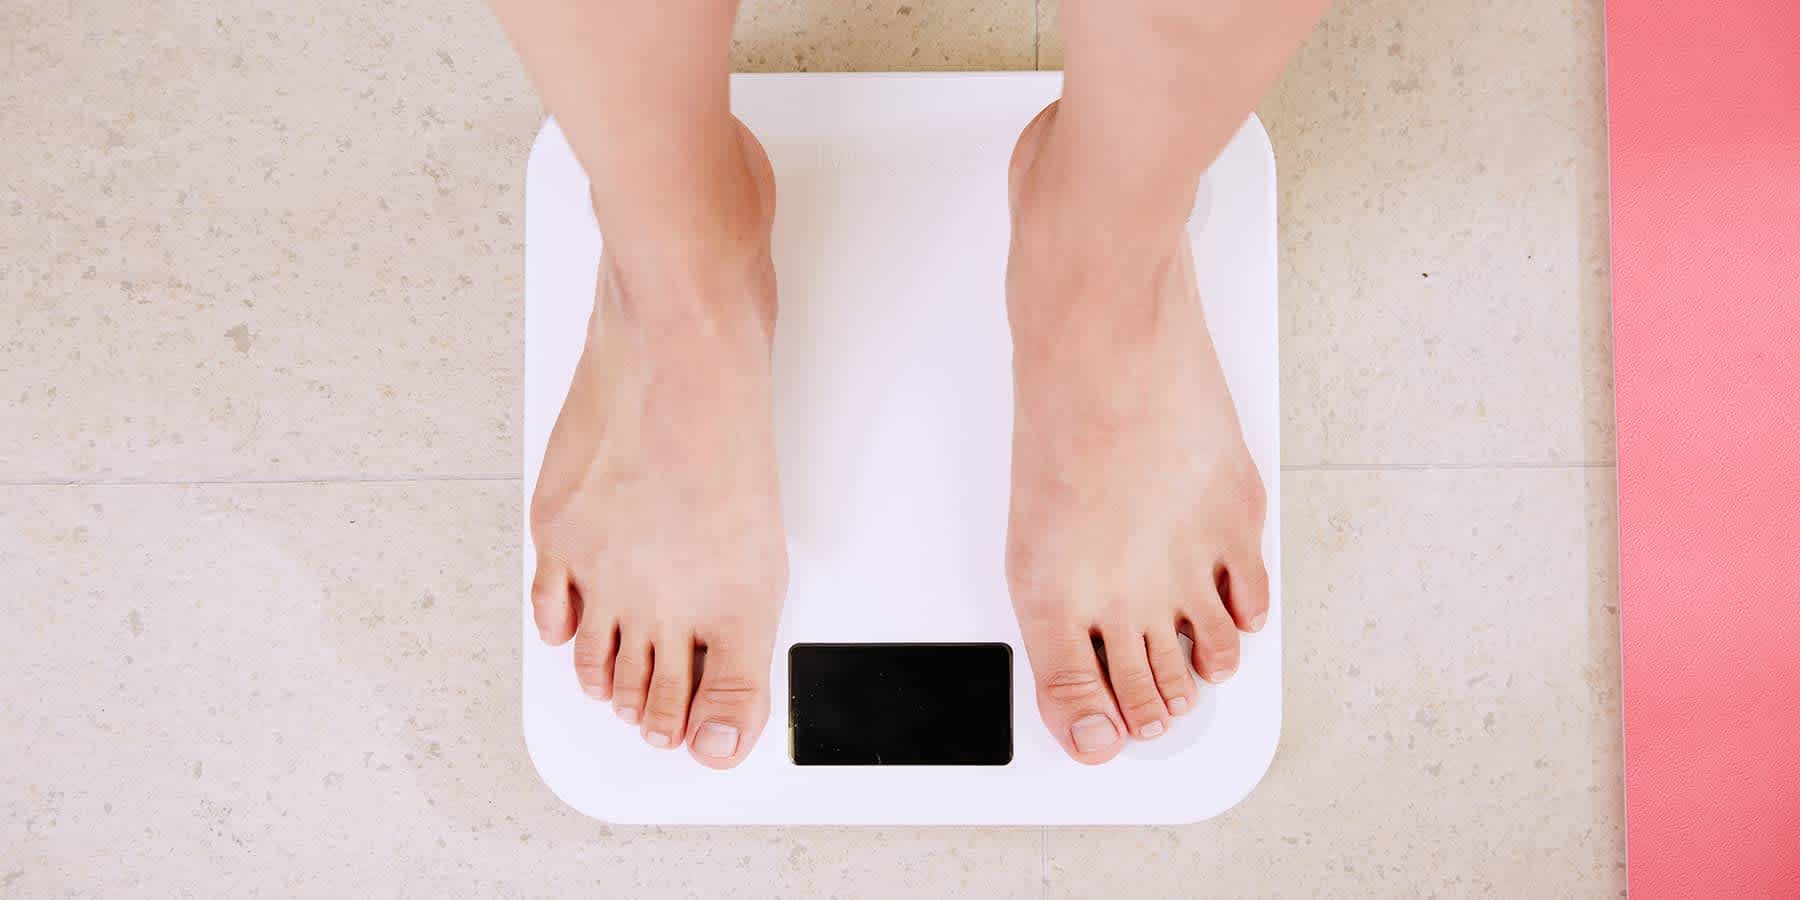 Person stepping on bathroom scale to check how much weight was lost in 3 months